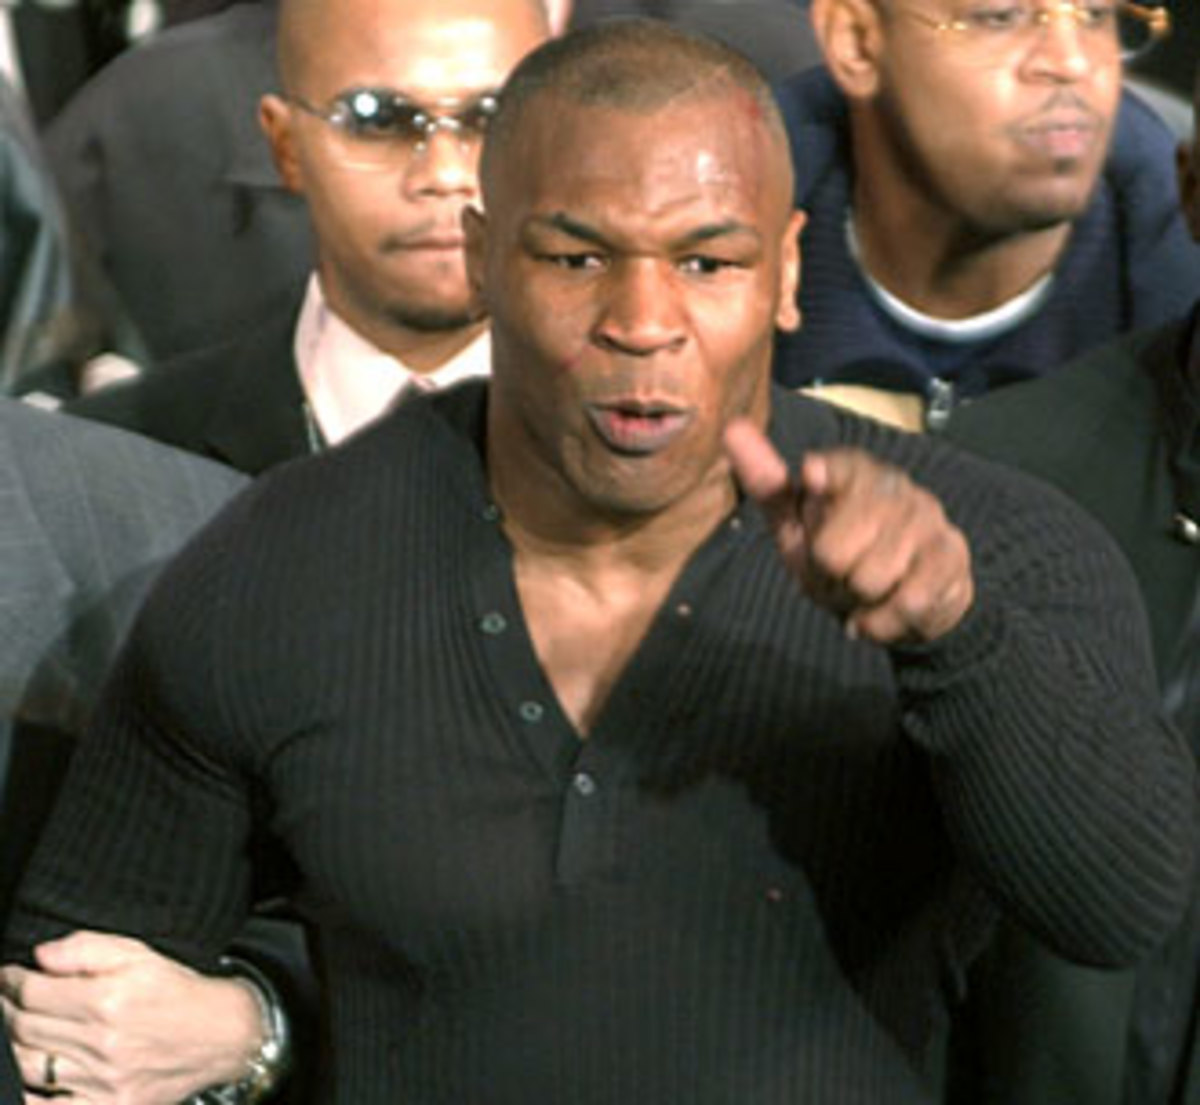 An outburst at a pre-fight press conference left many wondering about how Tyson would fare in the ring.